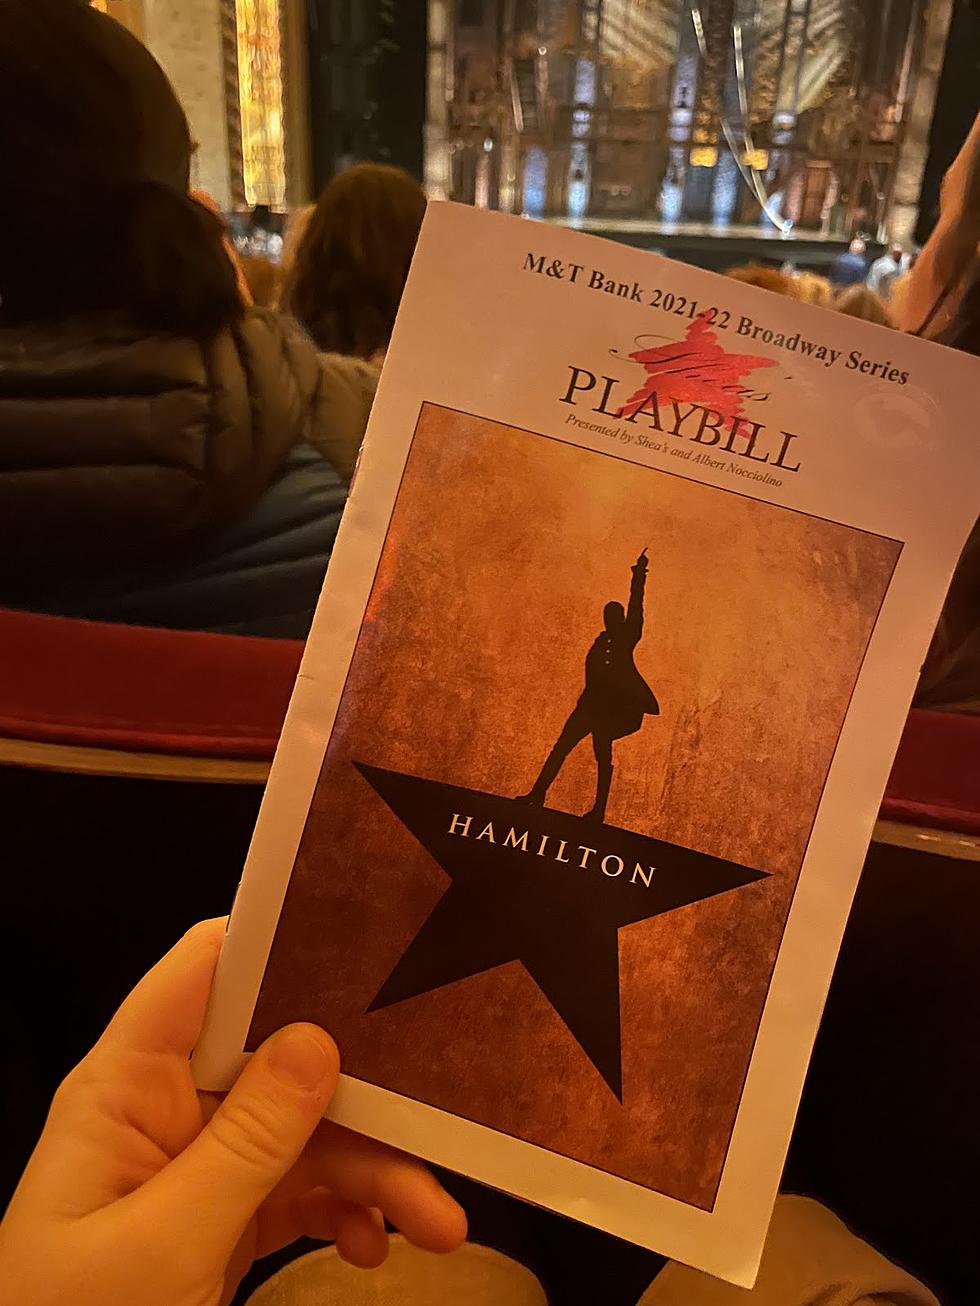 Three Performances for Hamilton At Shea’s Have Been Cancelled